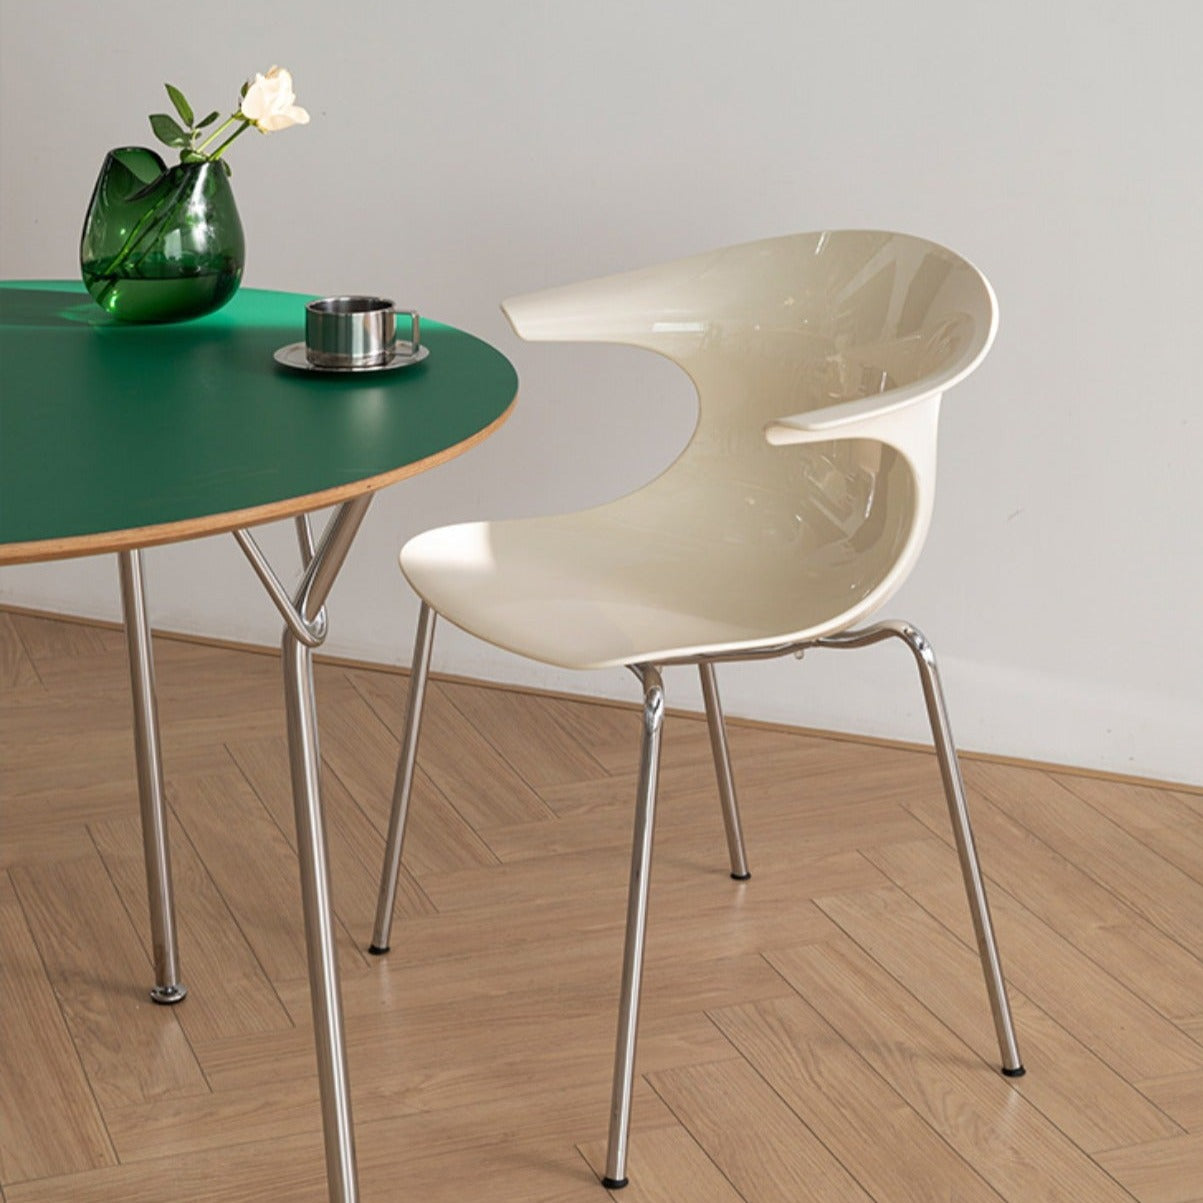 Mid-century dining chair | Stylish chair